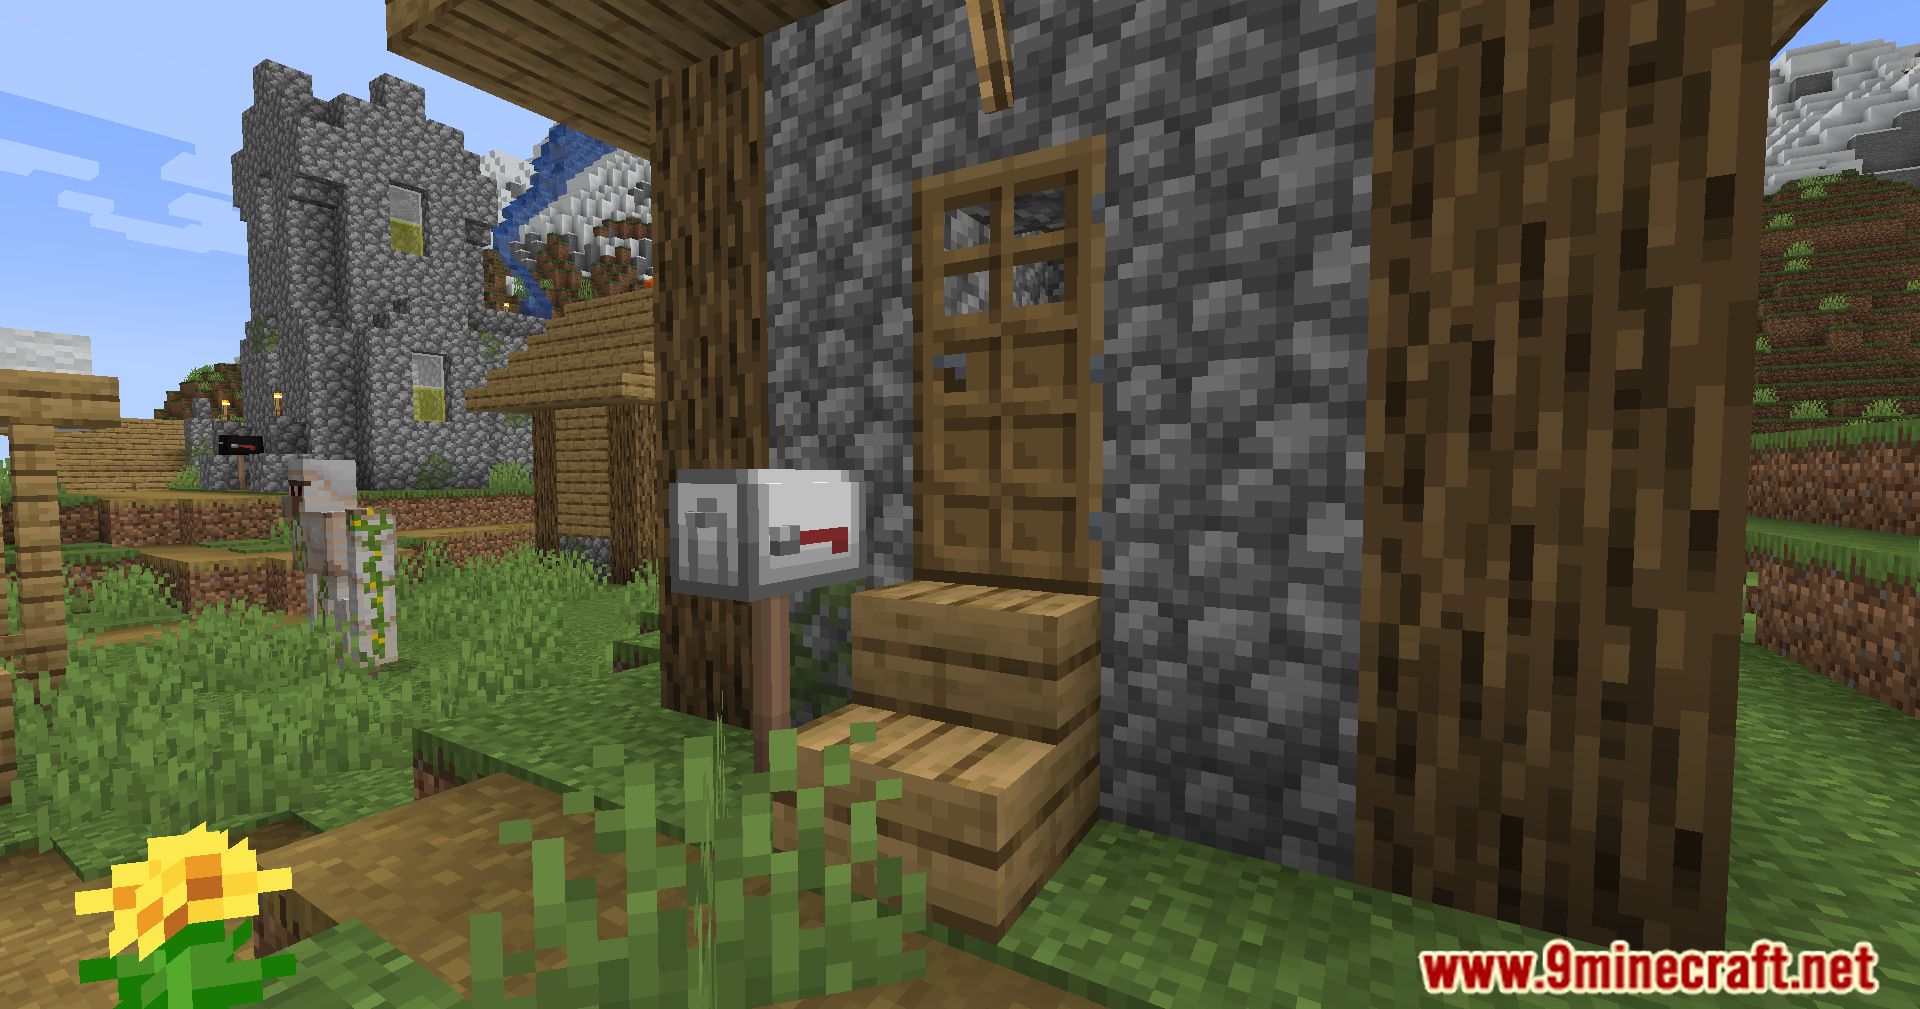 Contact Mod (1.20.1, 1.19.3) - Redefining Communication In Minecraft! 6